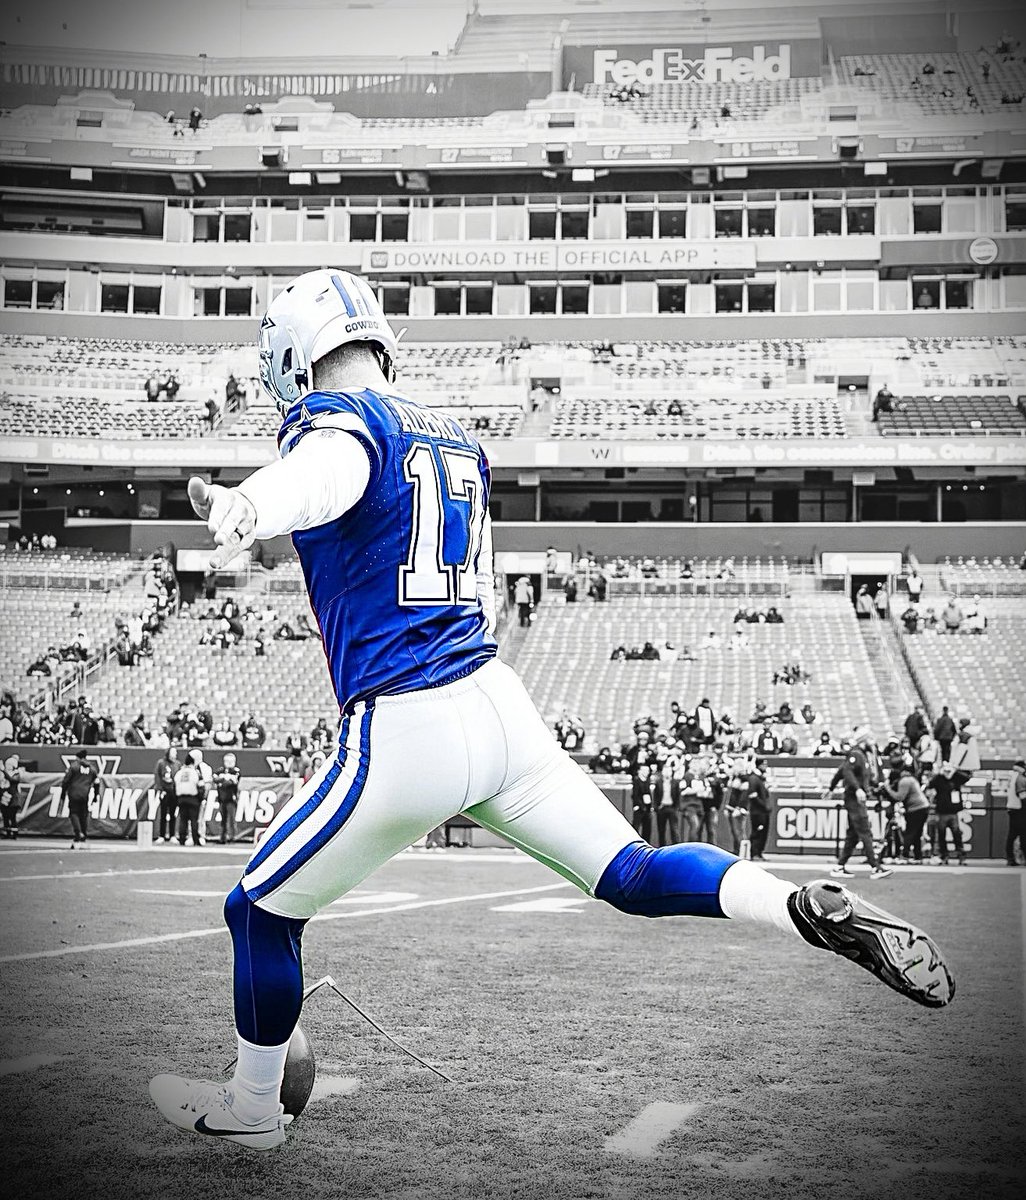 Our kicker is so hardcore, he kicked in the Pro Bowl with appendicitis...

...kickers need love too...so I had to do it, fam. 

Butter 🧈🧈🧈...forever #Legend. 

(Credit: @dallascowboys ...edits by me)